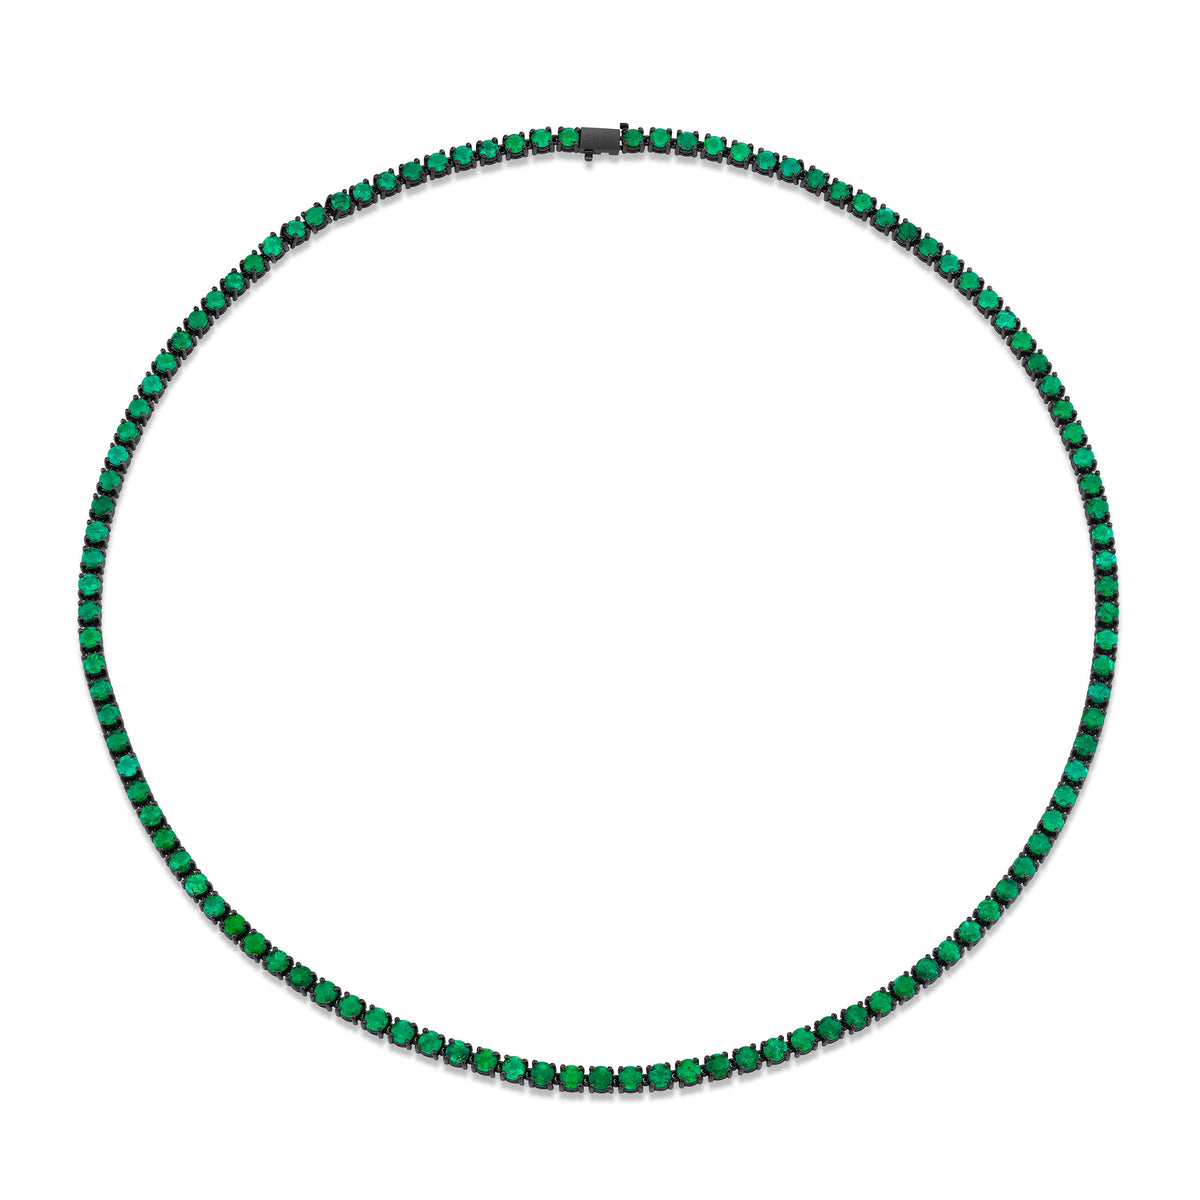 READY TO SHIP MEN'S EMERALD ROUND TENNIS NECKLACE, 22IN